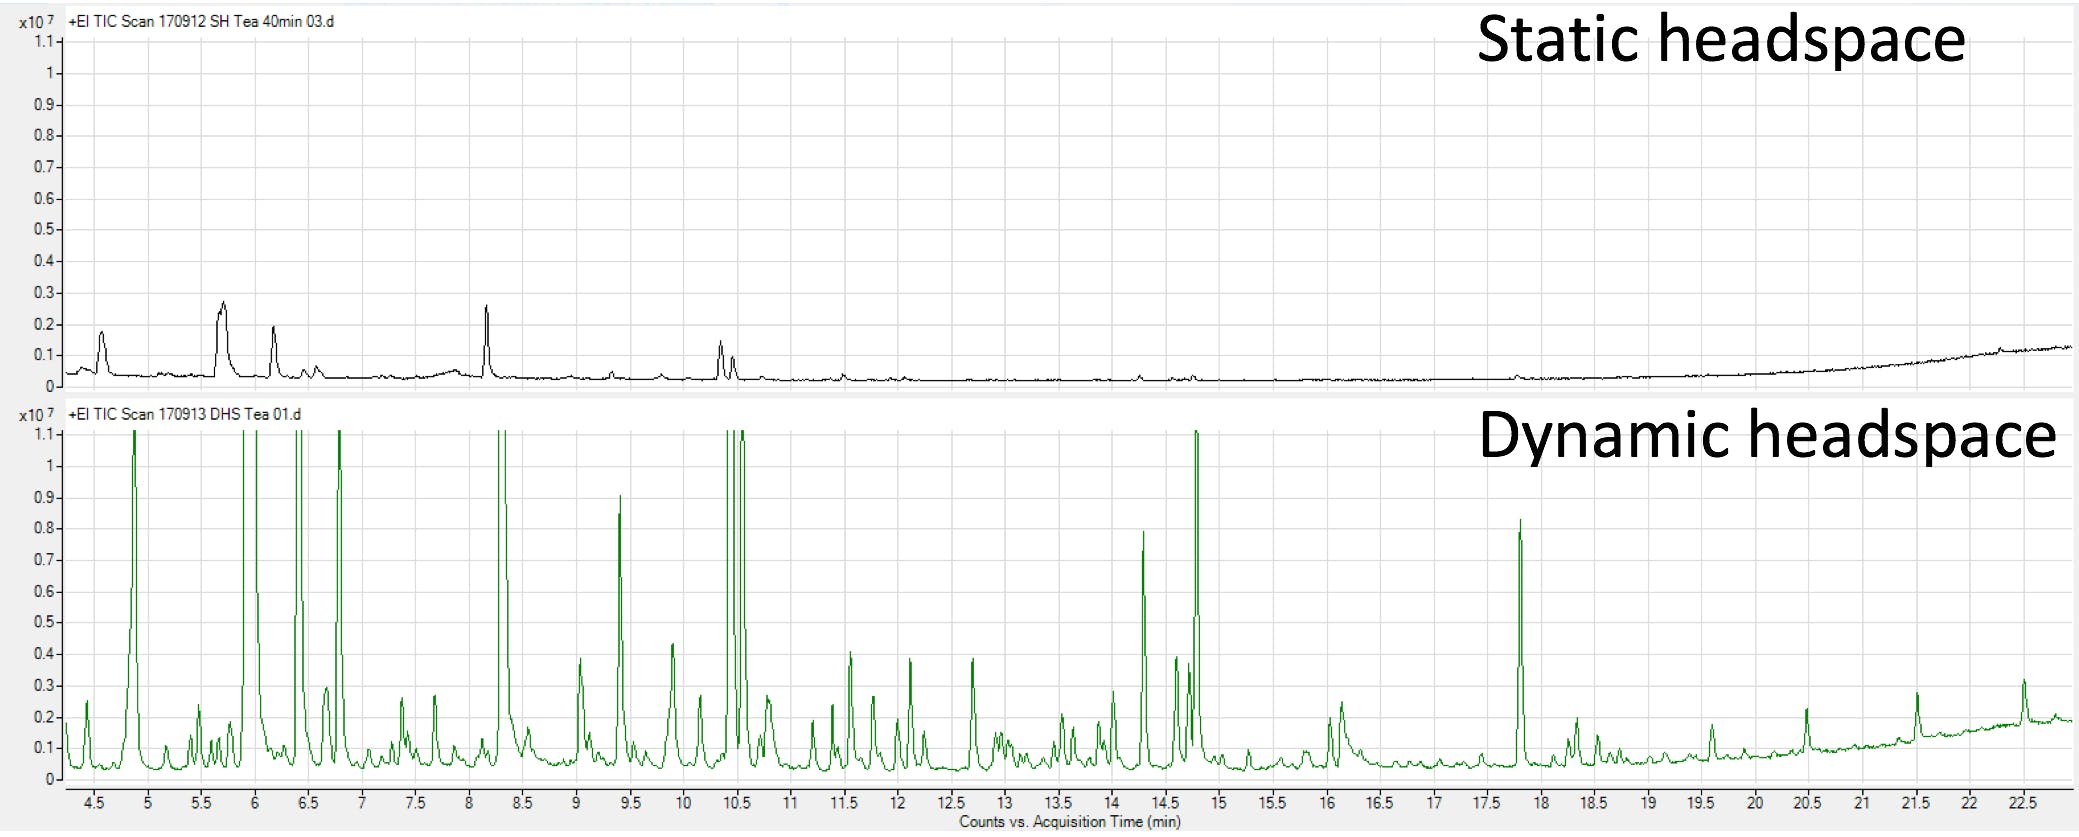 Chromatograms from extraction of dry tea samples (1g) using both static and dynamic headspace sampling